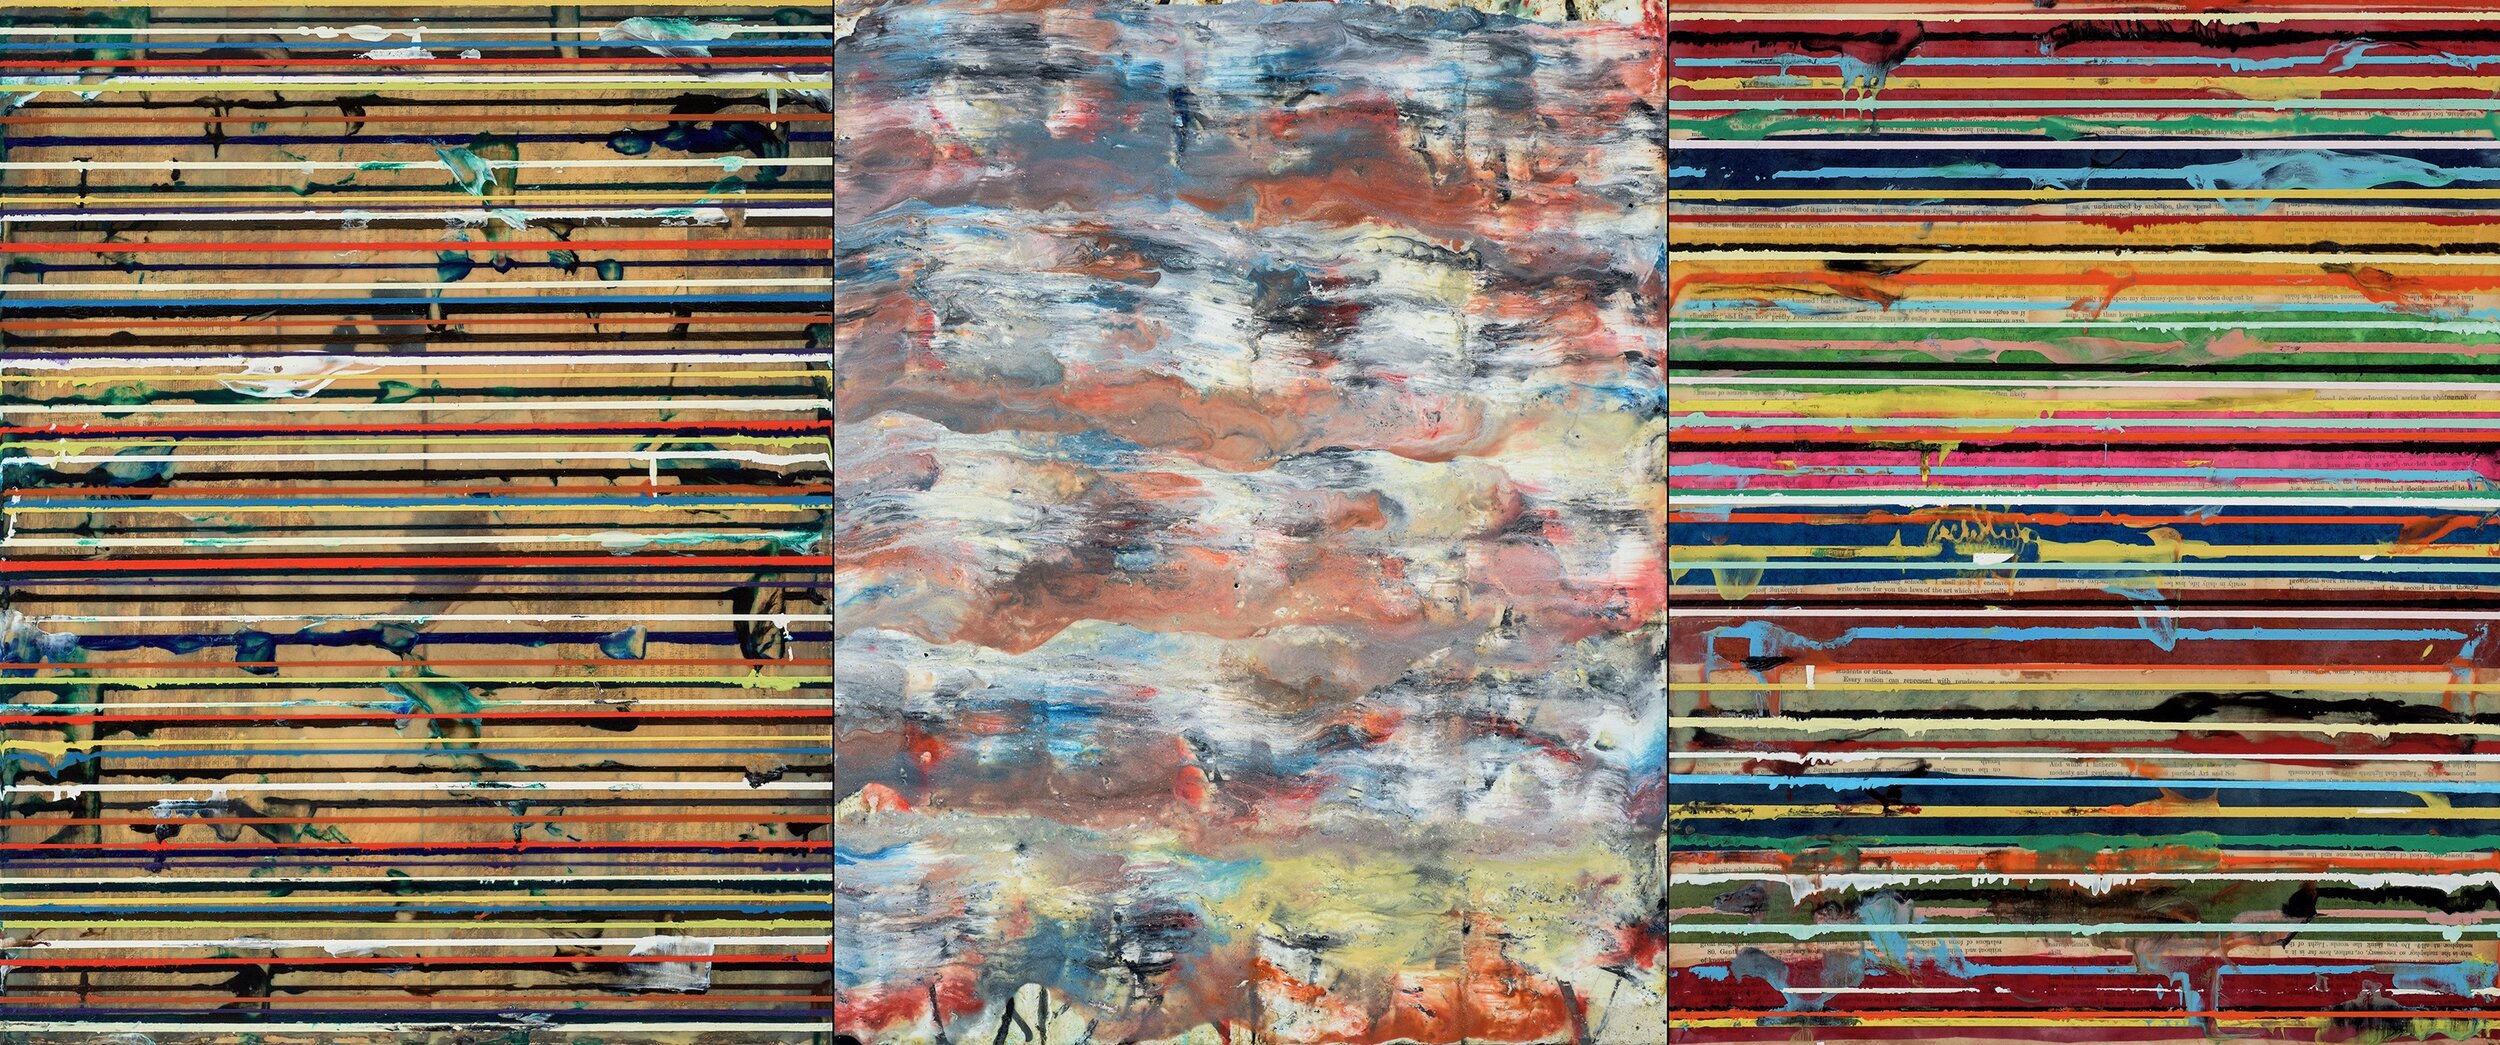  "Rolling", 2016, encaustic, oil and collage on board, 20" x 48", triptych 